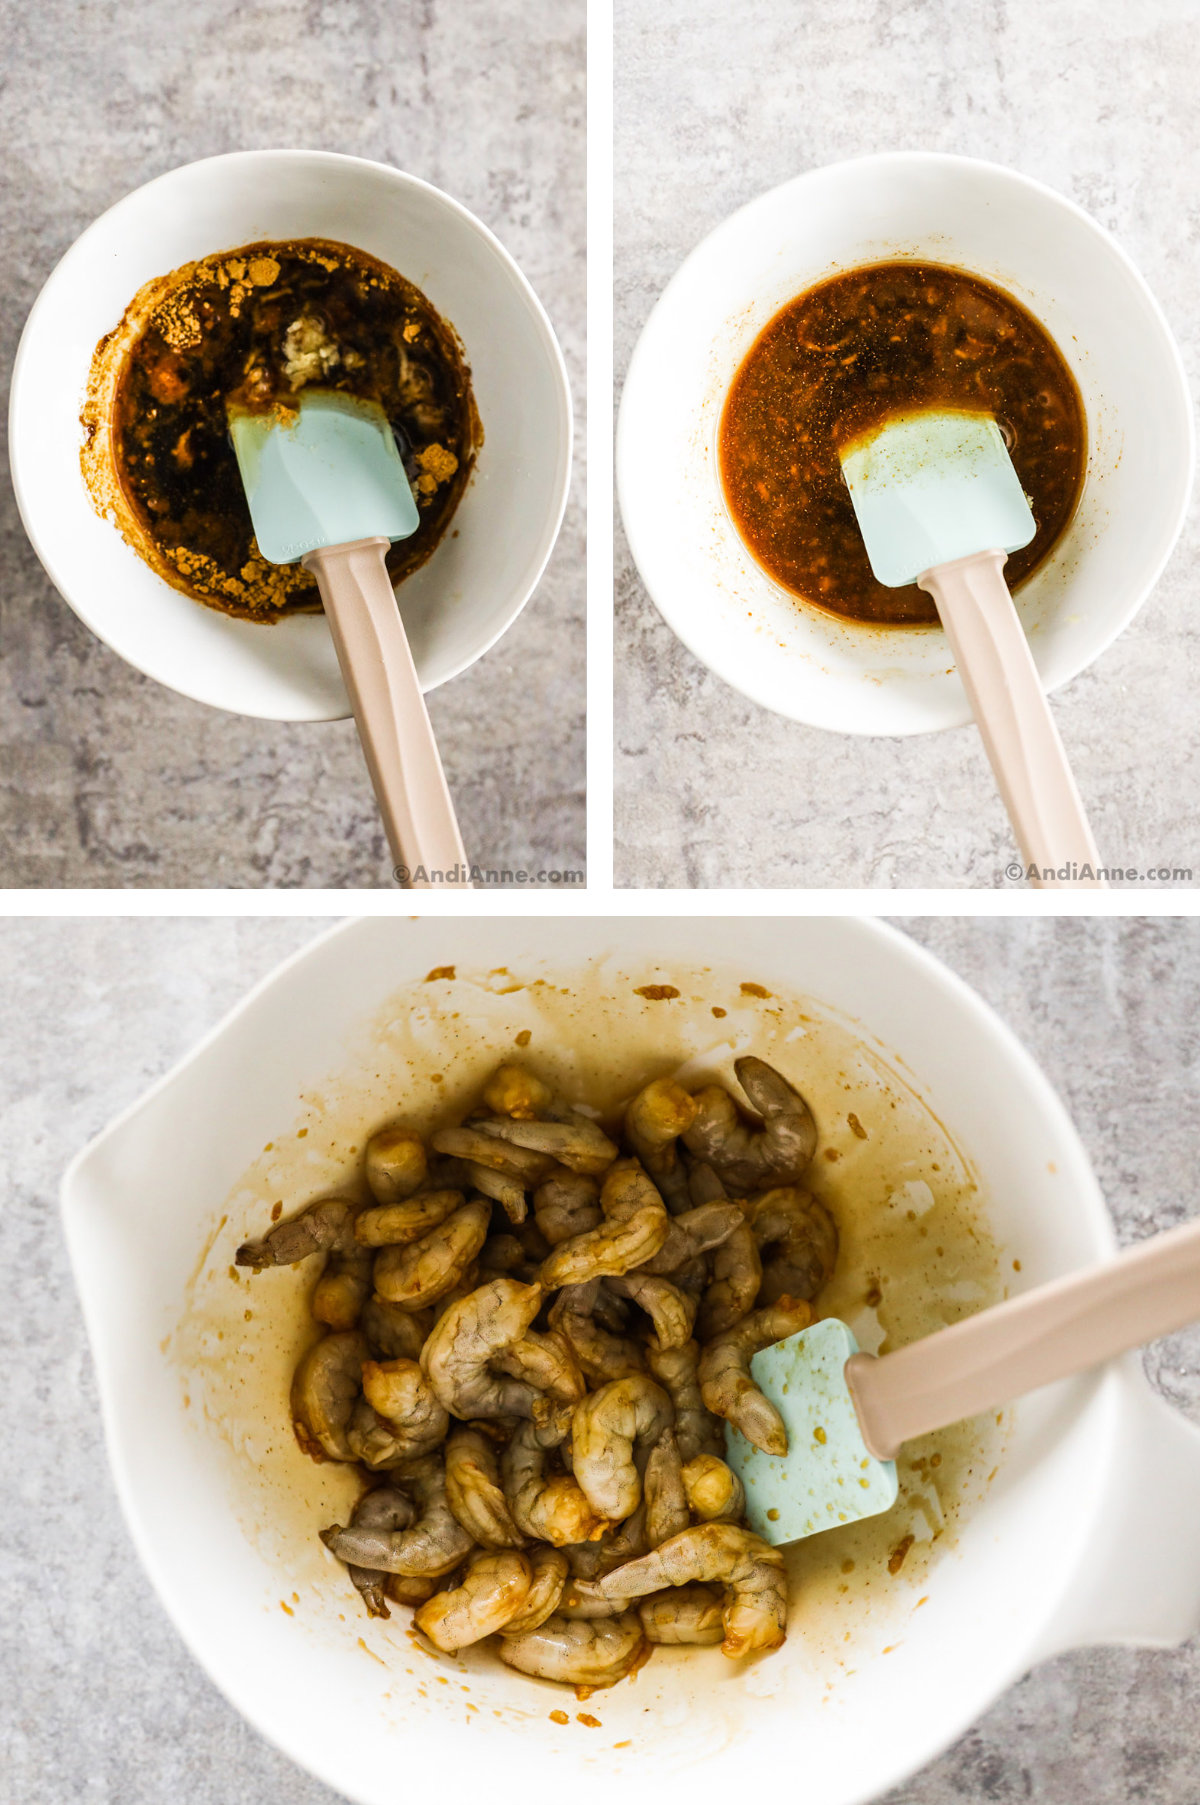 Two images of a bowl with dark brown sauce ingredients and a spatula, and third image of raw shrimp in a bowl covered in sauce with spatula.